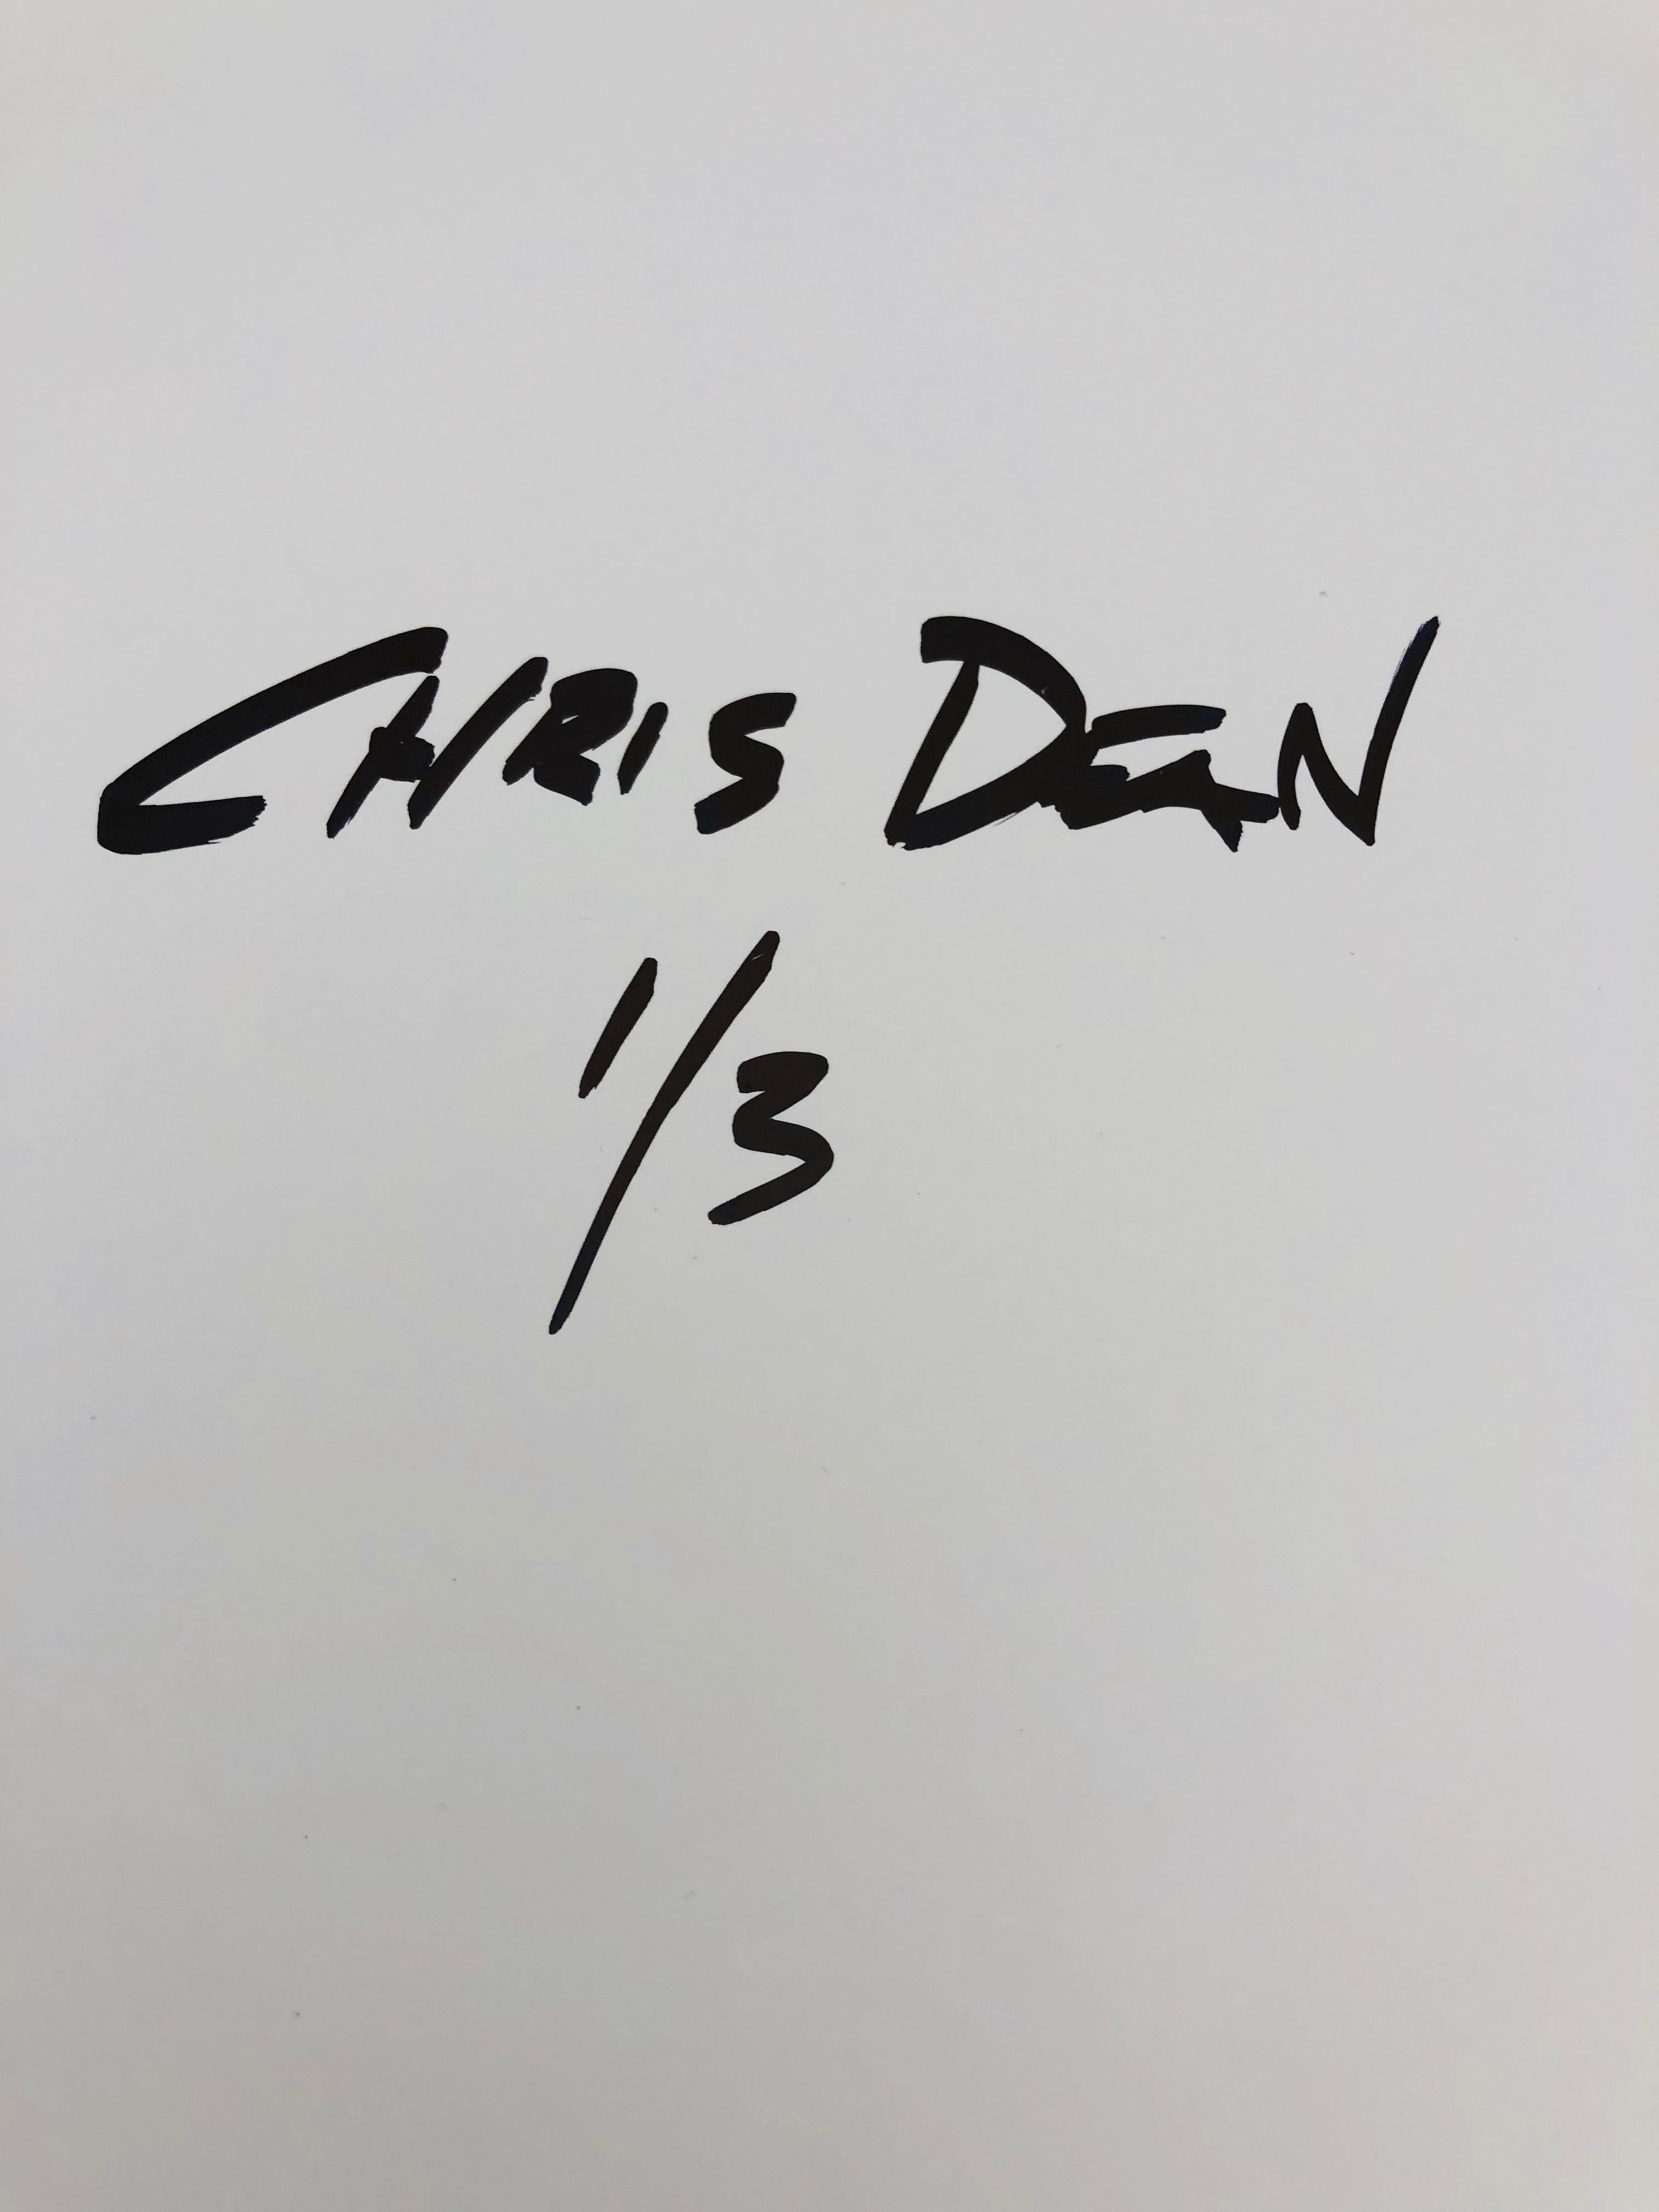 Chris Dean is a Detroit based artist specializing in the medium of lenticular printmaking. Dean's brightly colored work uses lenticular's unique capacity for illusion to create interactive compositions of depth and motion. The visually dense work